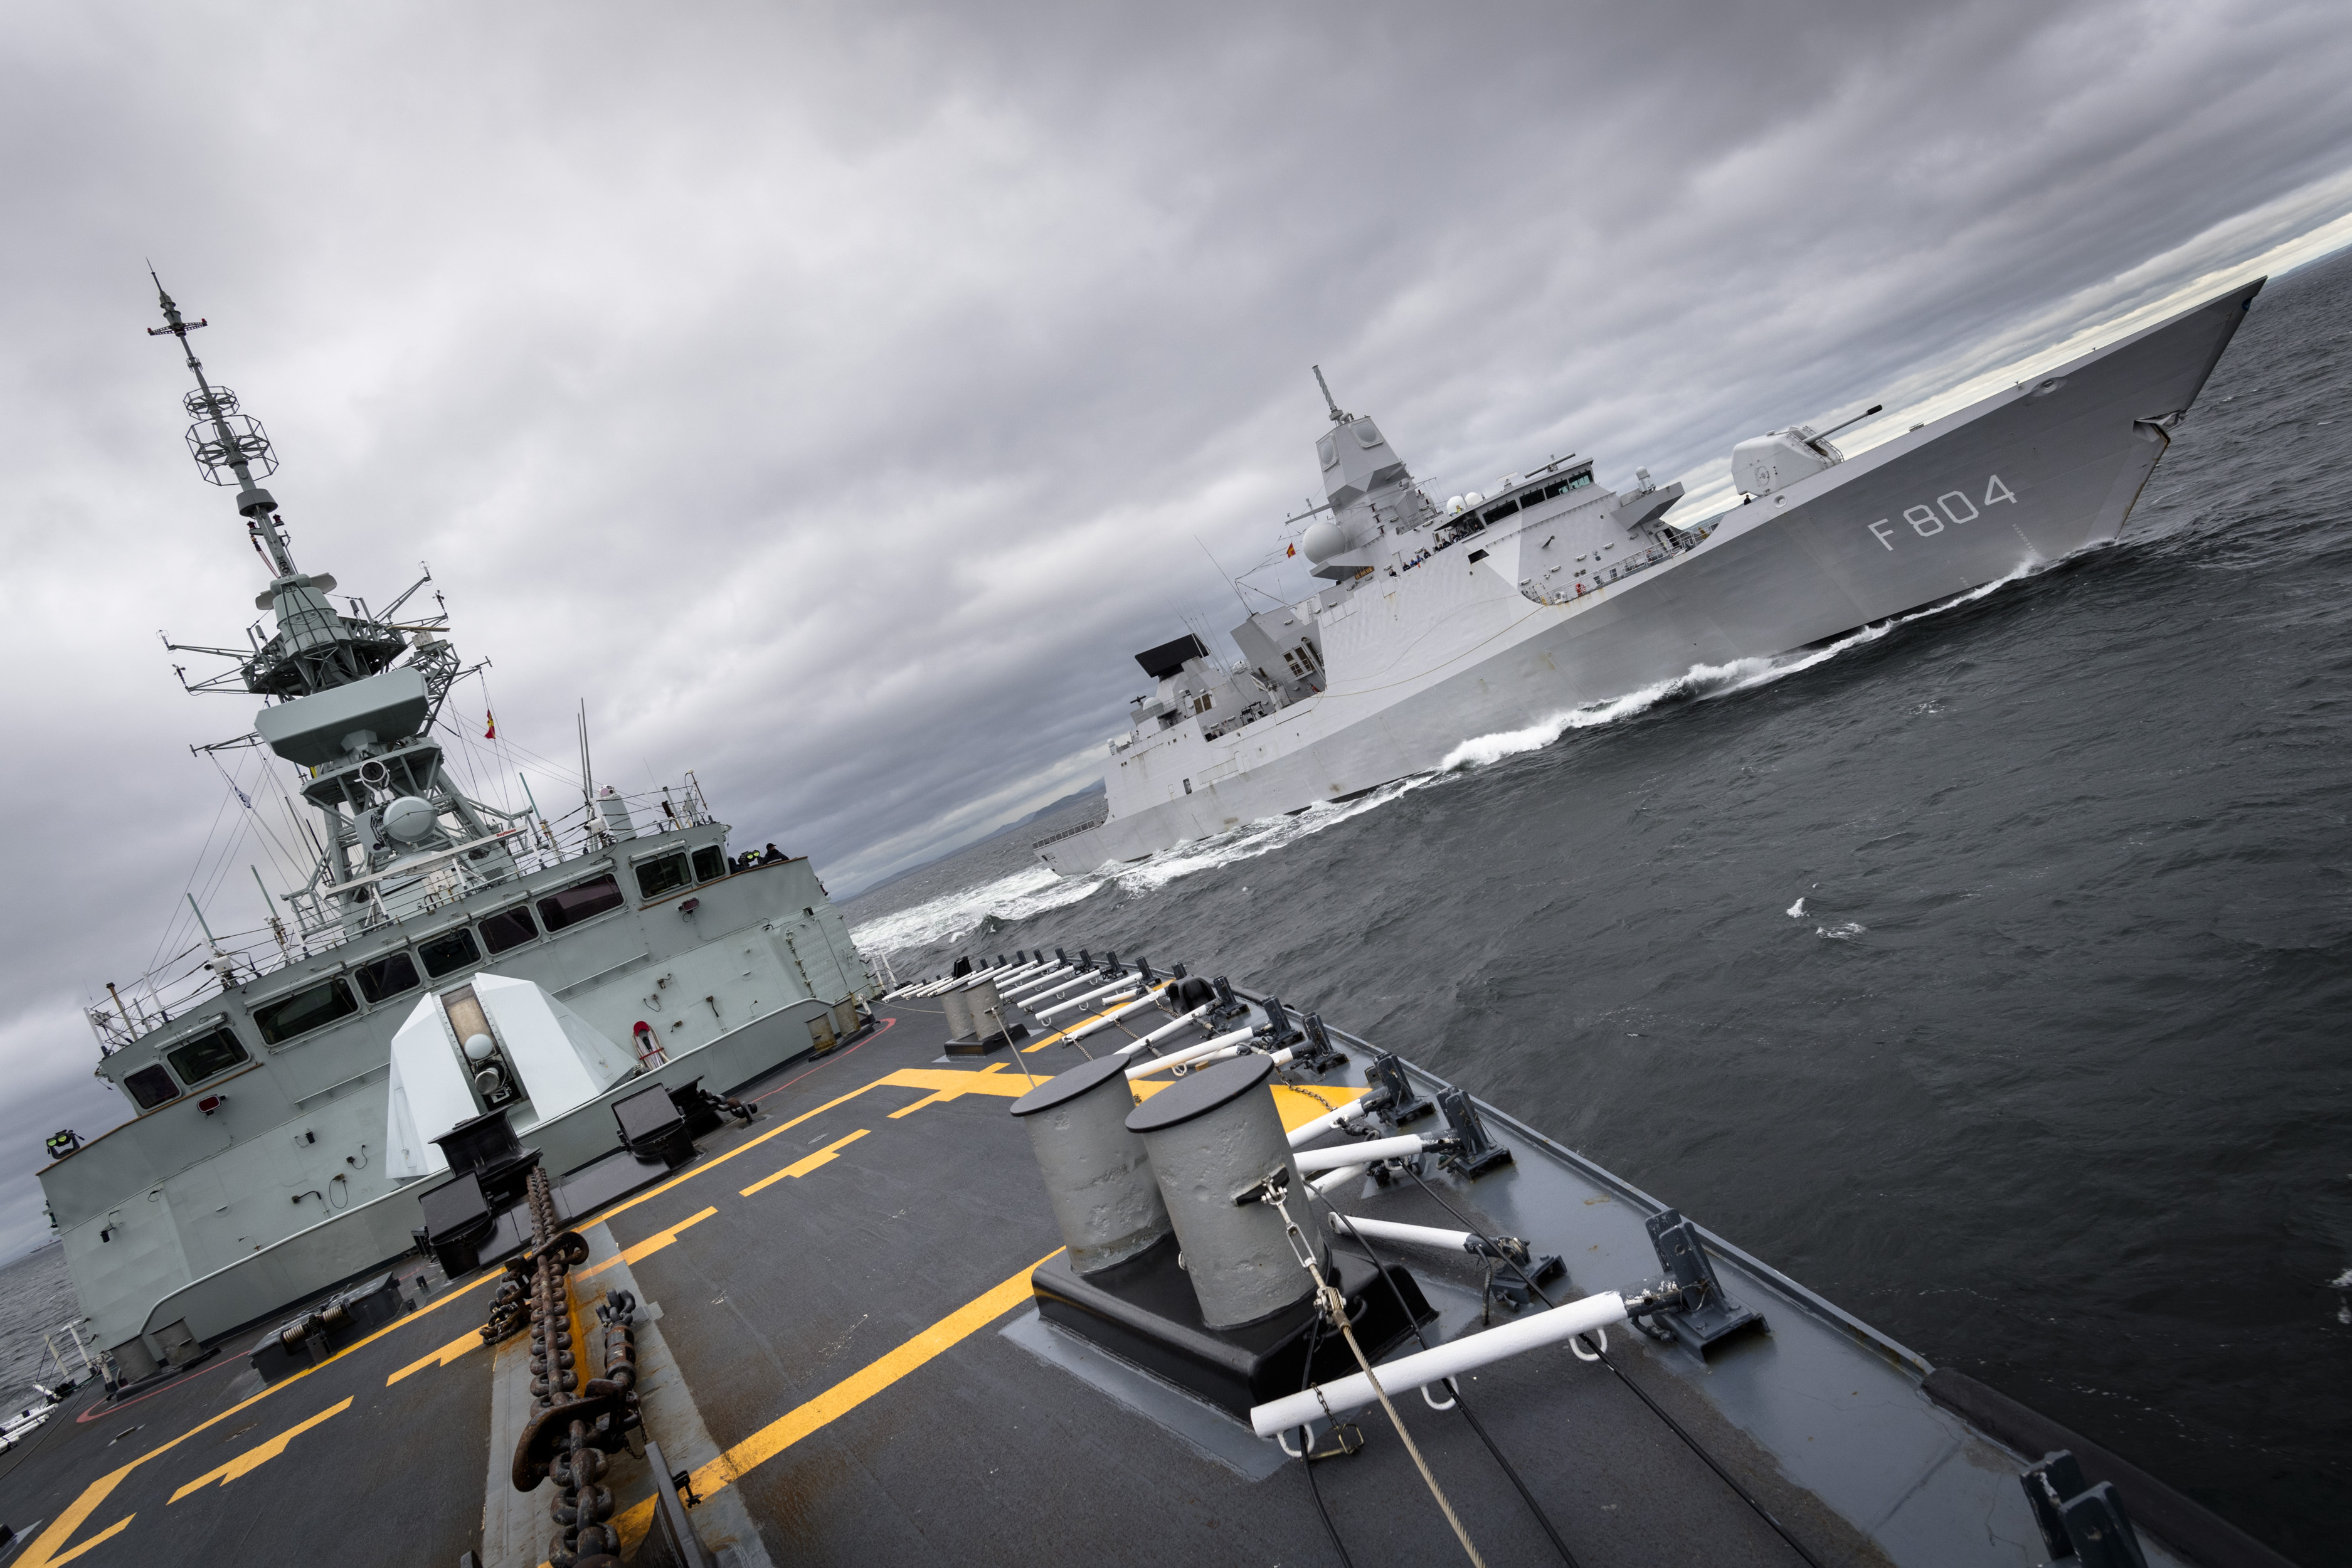 Royal Canadian Navy - News and Operations - Article View | Navy News ...